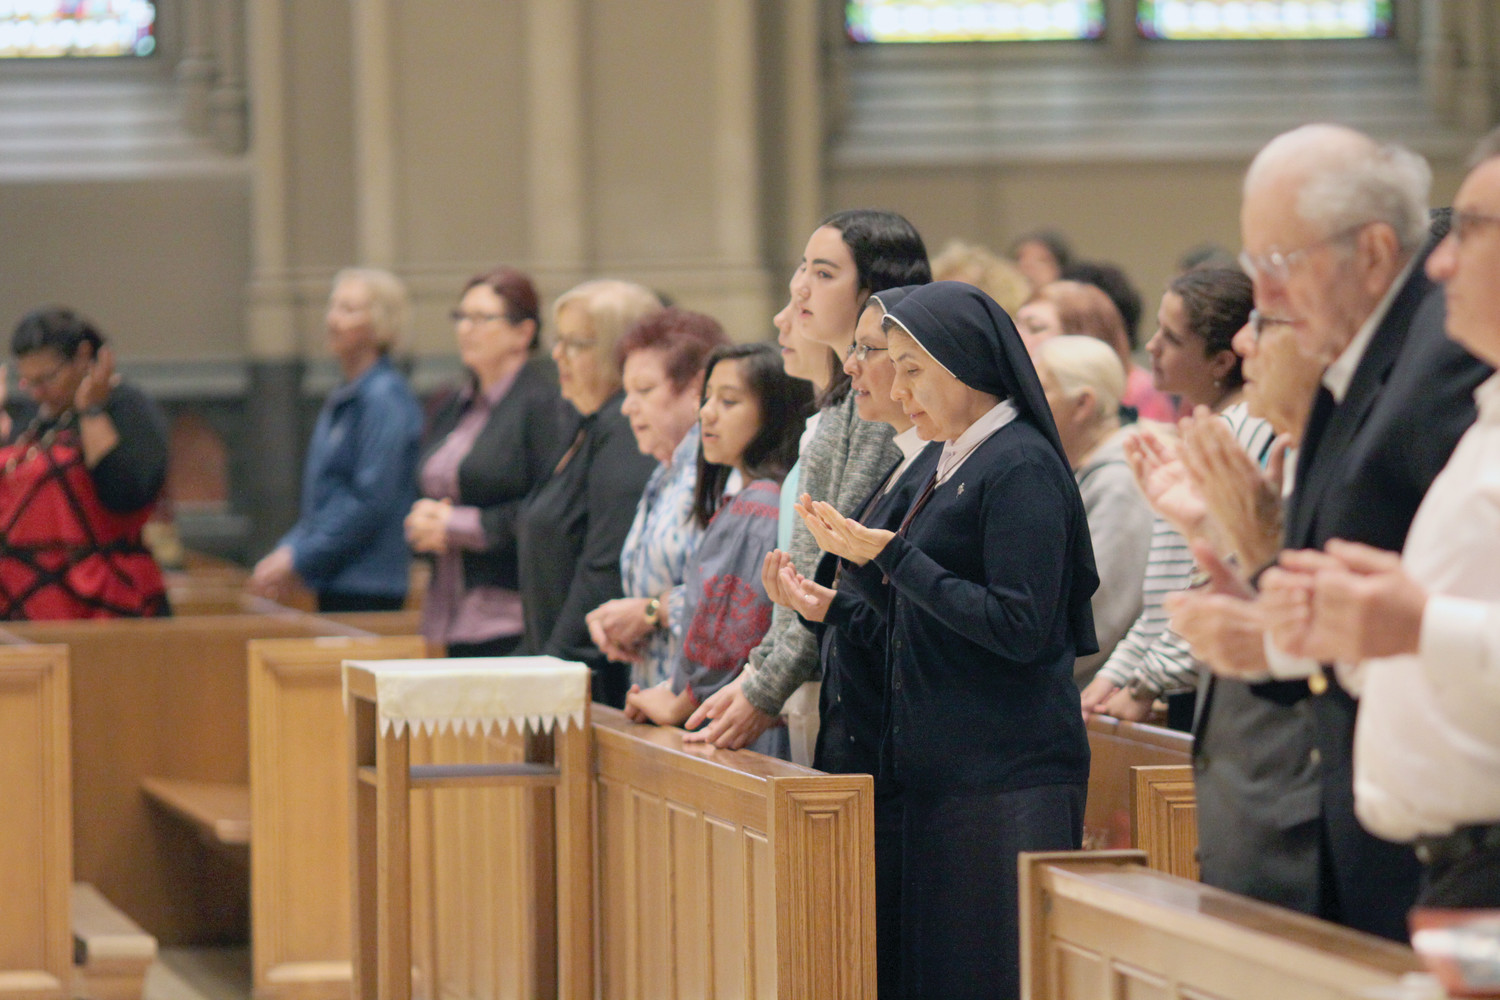 Among those who attended Sunday’s Mass were members of the Missionary Sisters Servants of the Word, who have a convent in West Greenwich, and students from Overbrook Academy, located in Greenville. Both groups had relatives affected by the earthquakes in Mexico in September.